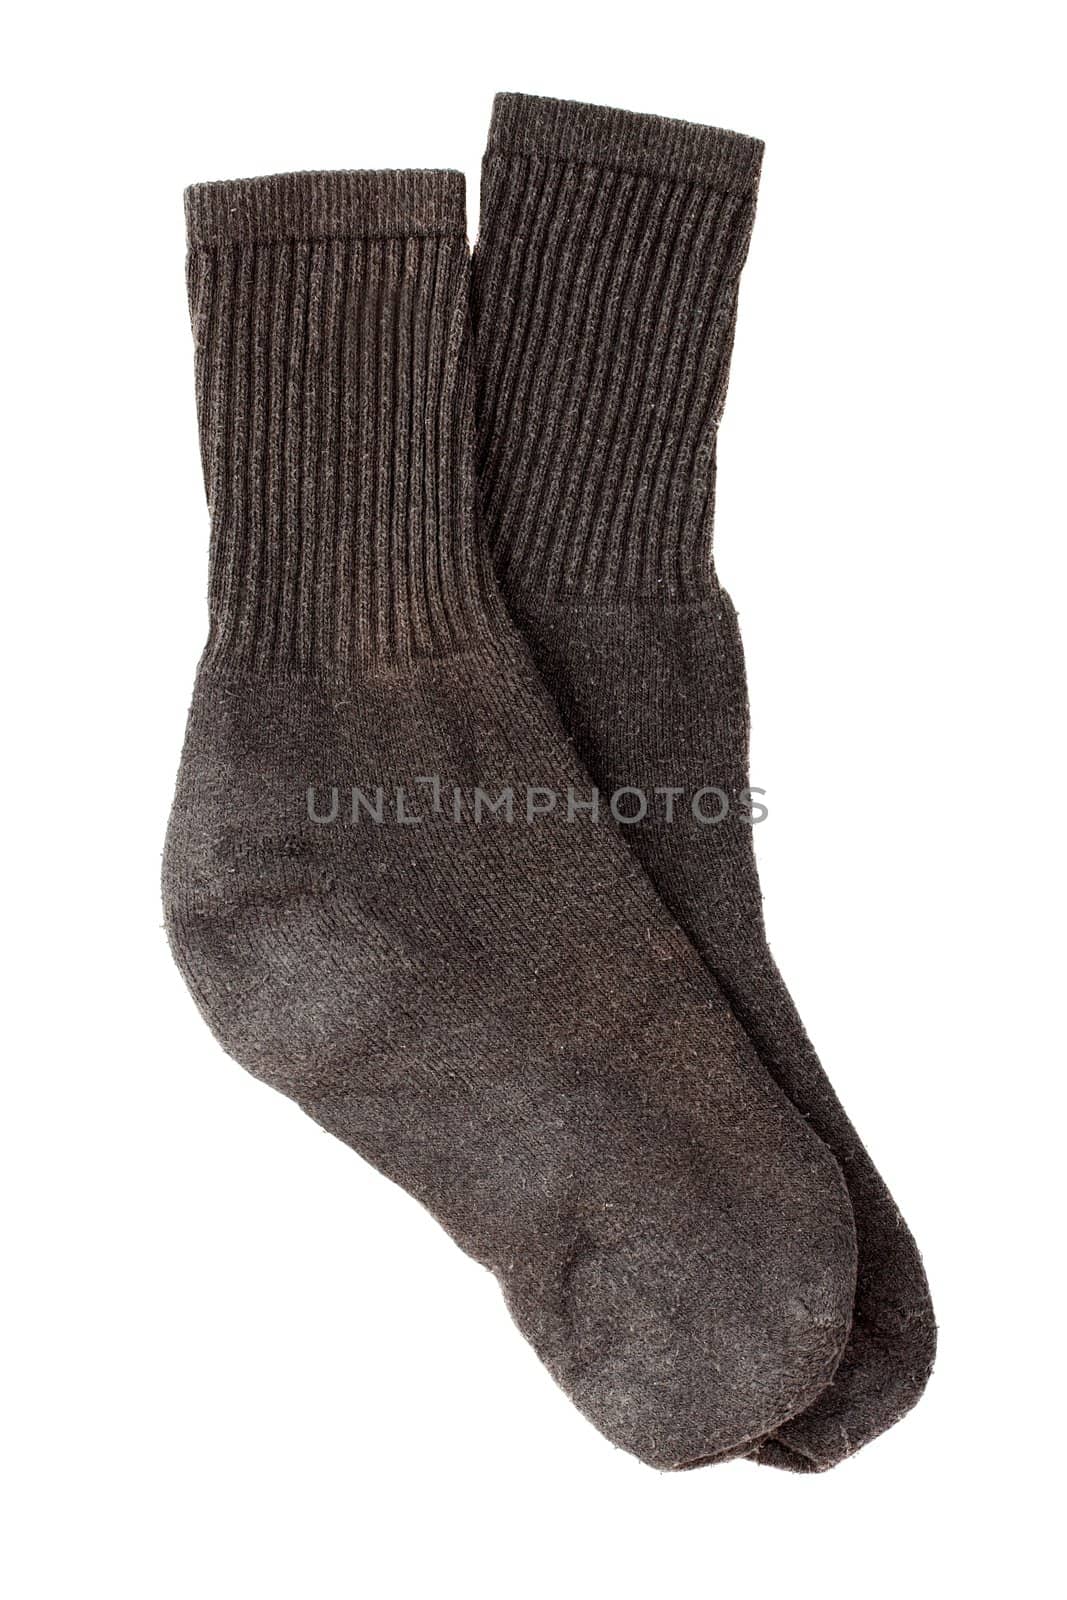 A pair of socks isolated on white